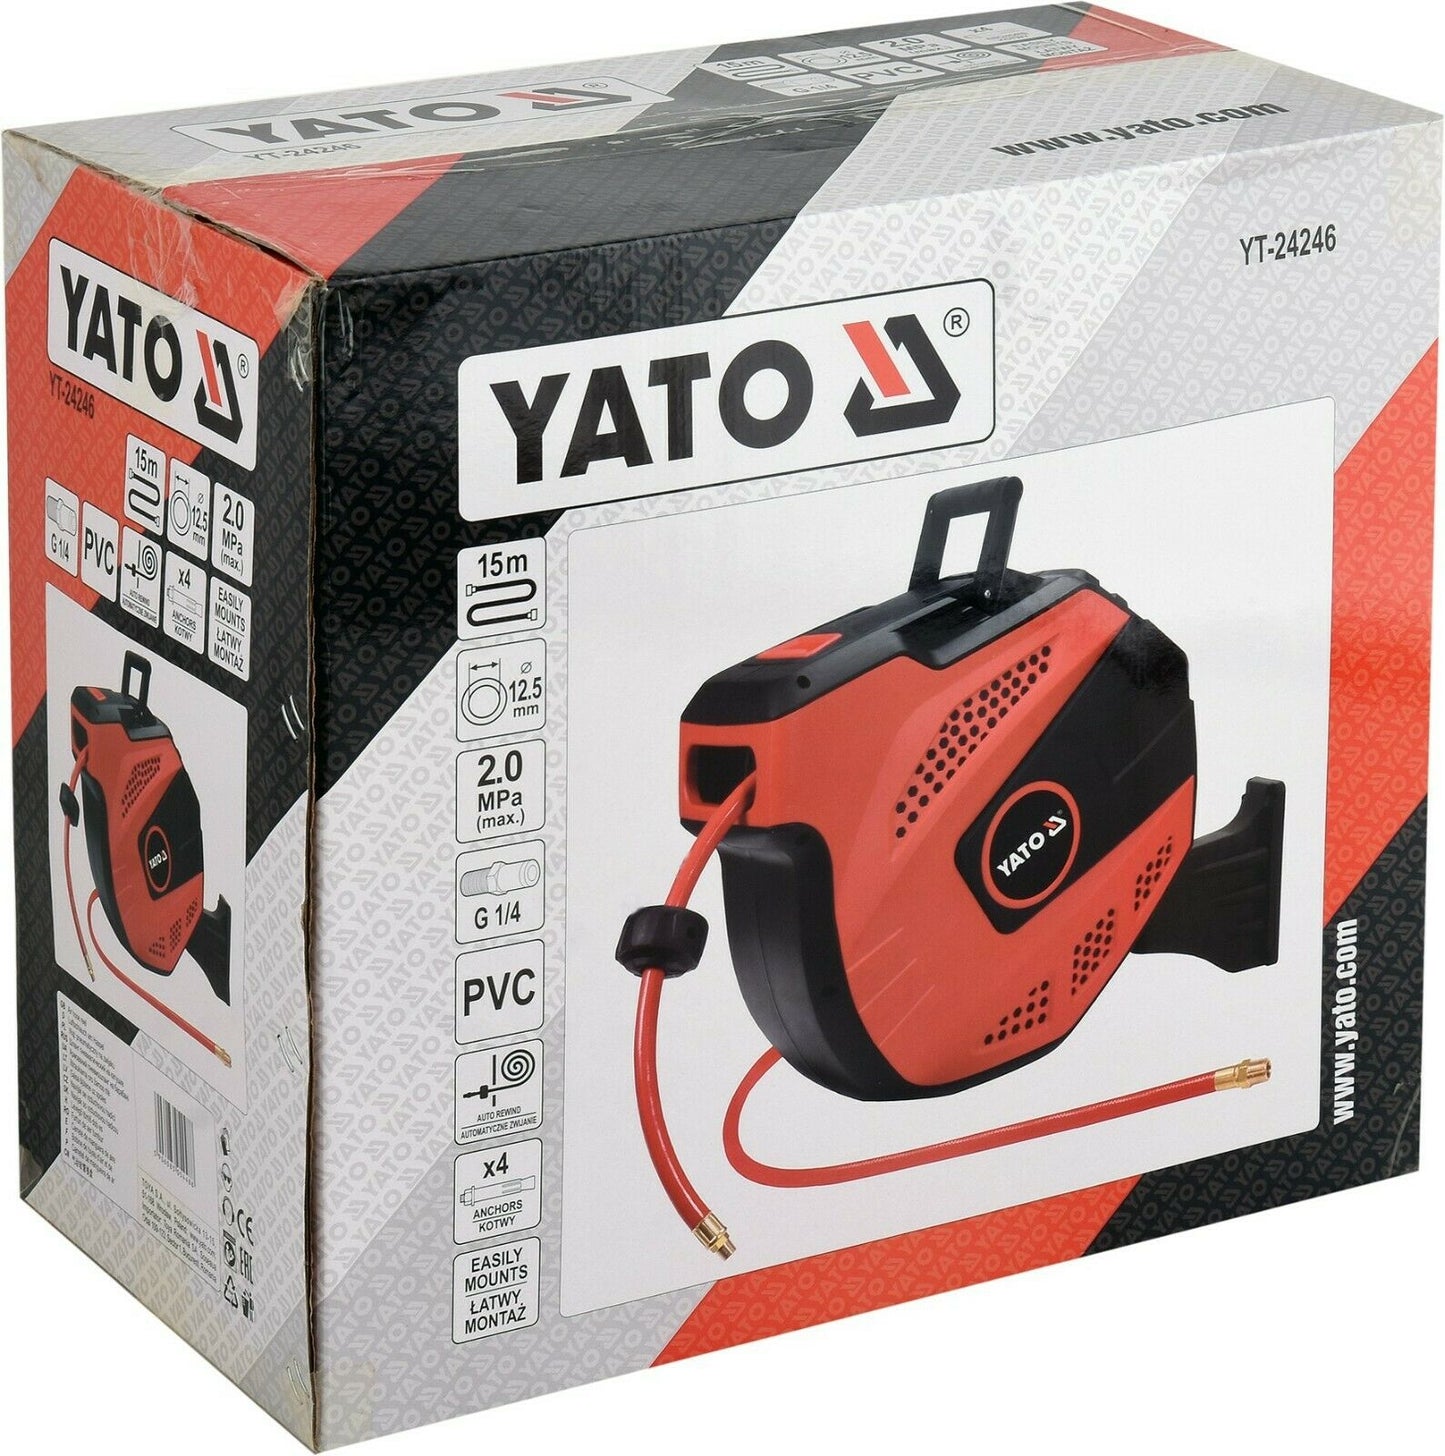 Yato compressed air hose drum 1/4 "12.5mm automatic hose roller 15m coil